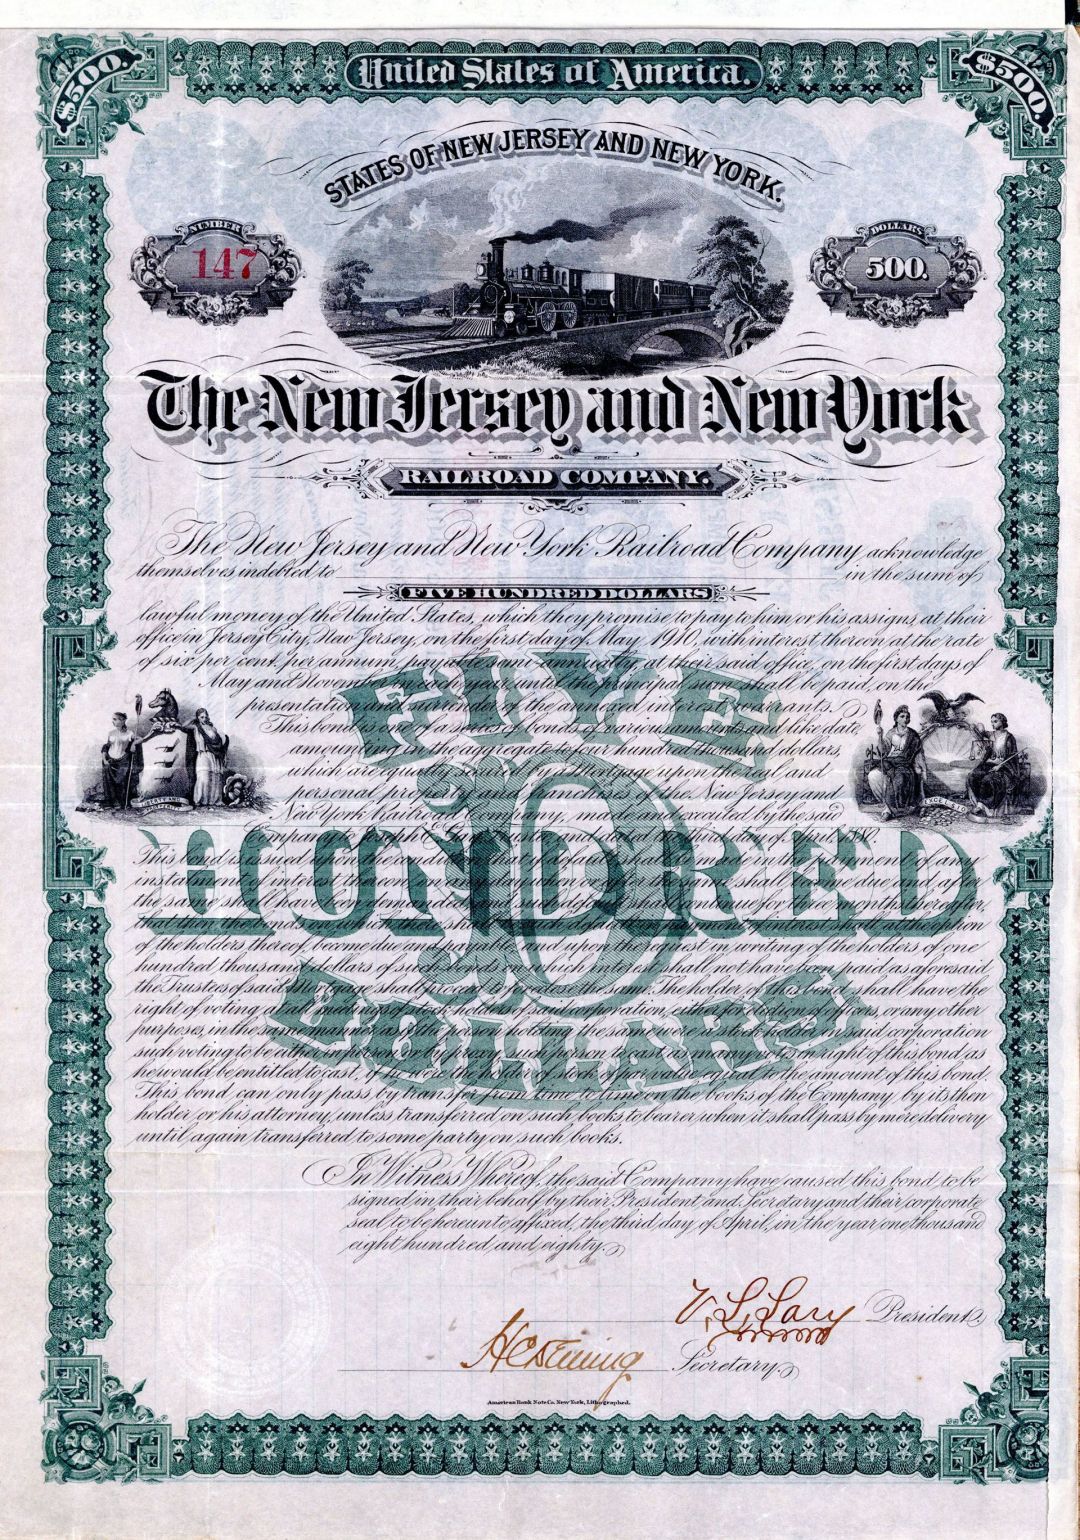 New Jersey and New York Railroad Co. - $500 Bond (Uncanceled)